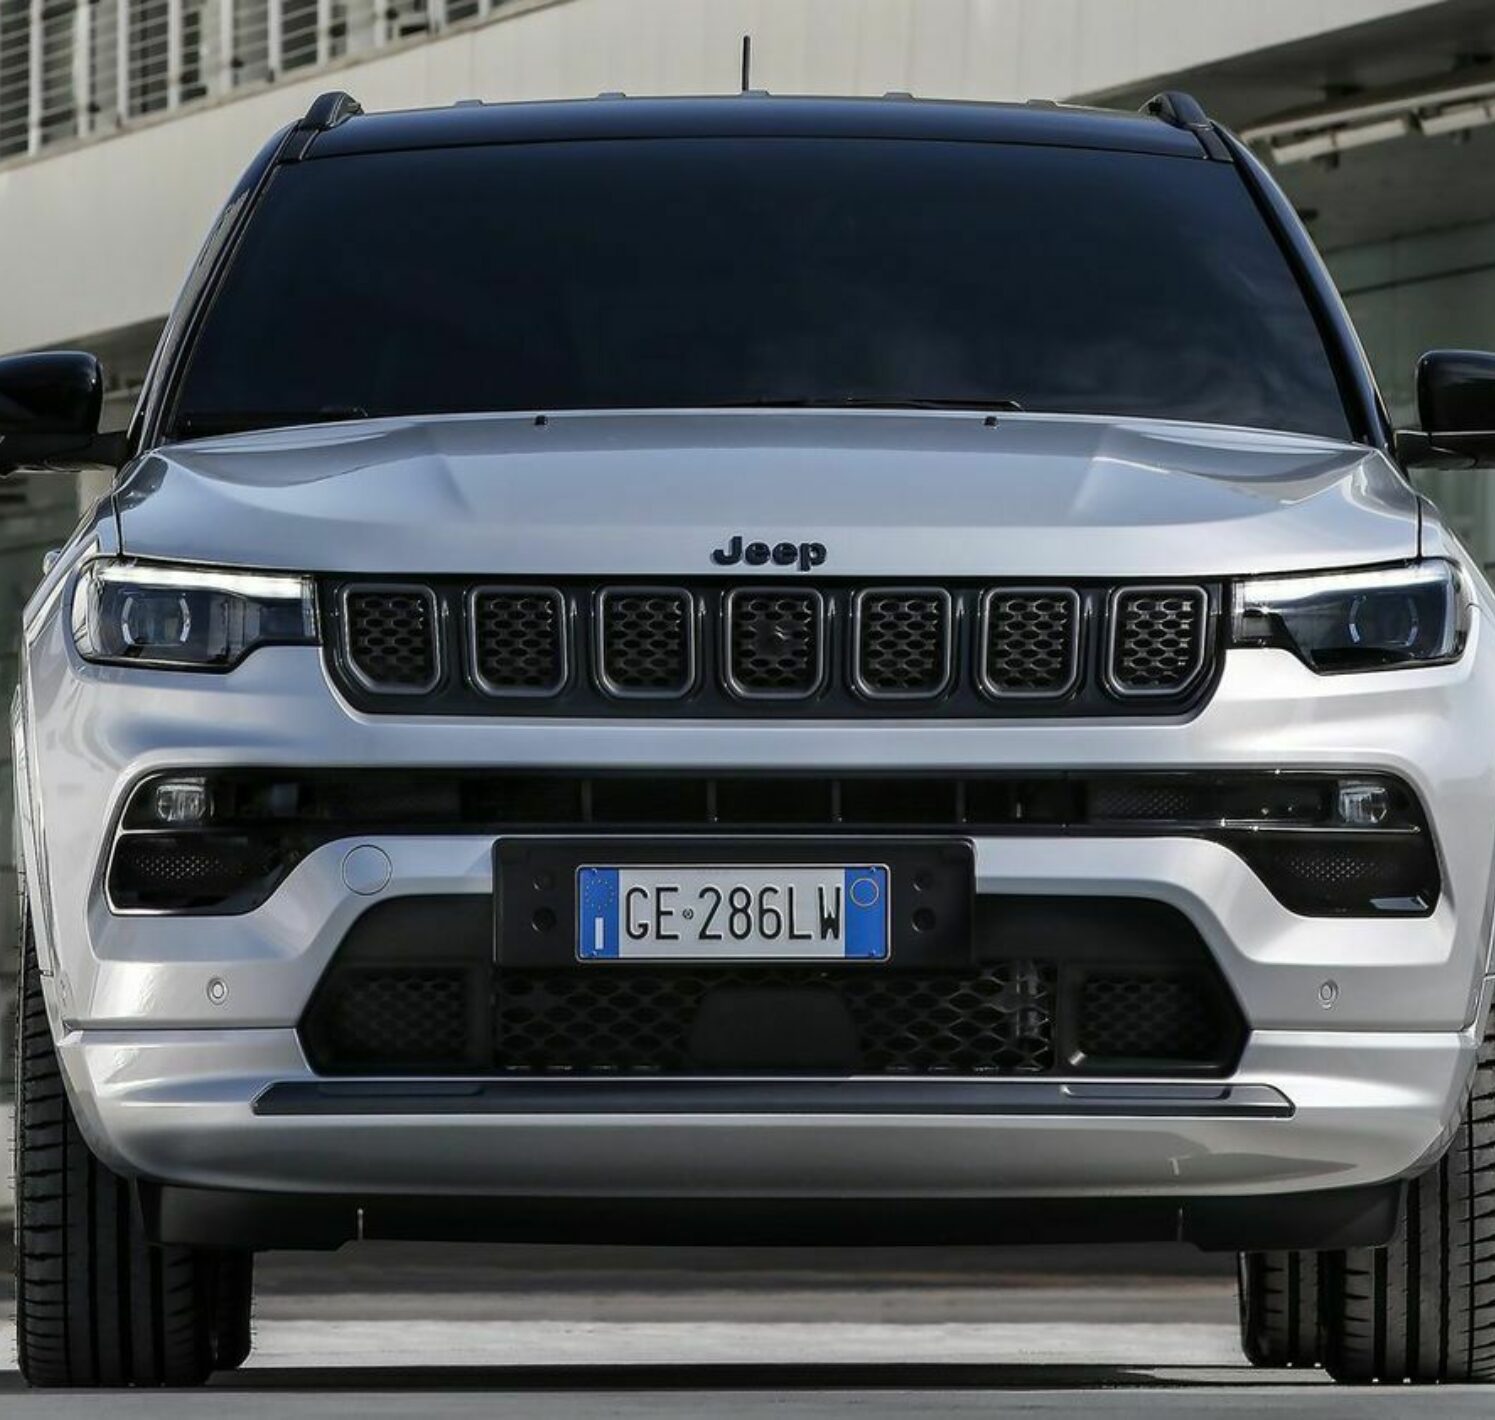 https://autofilter.sk/assets/images/compass/gallery/jeep-compass-2021_10-galeria.jpg - obrazok